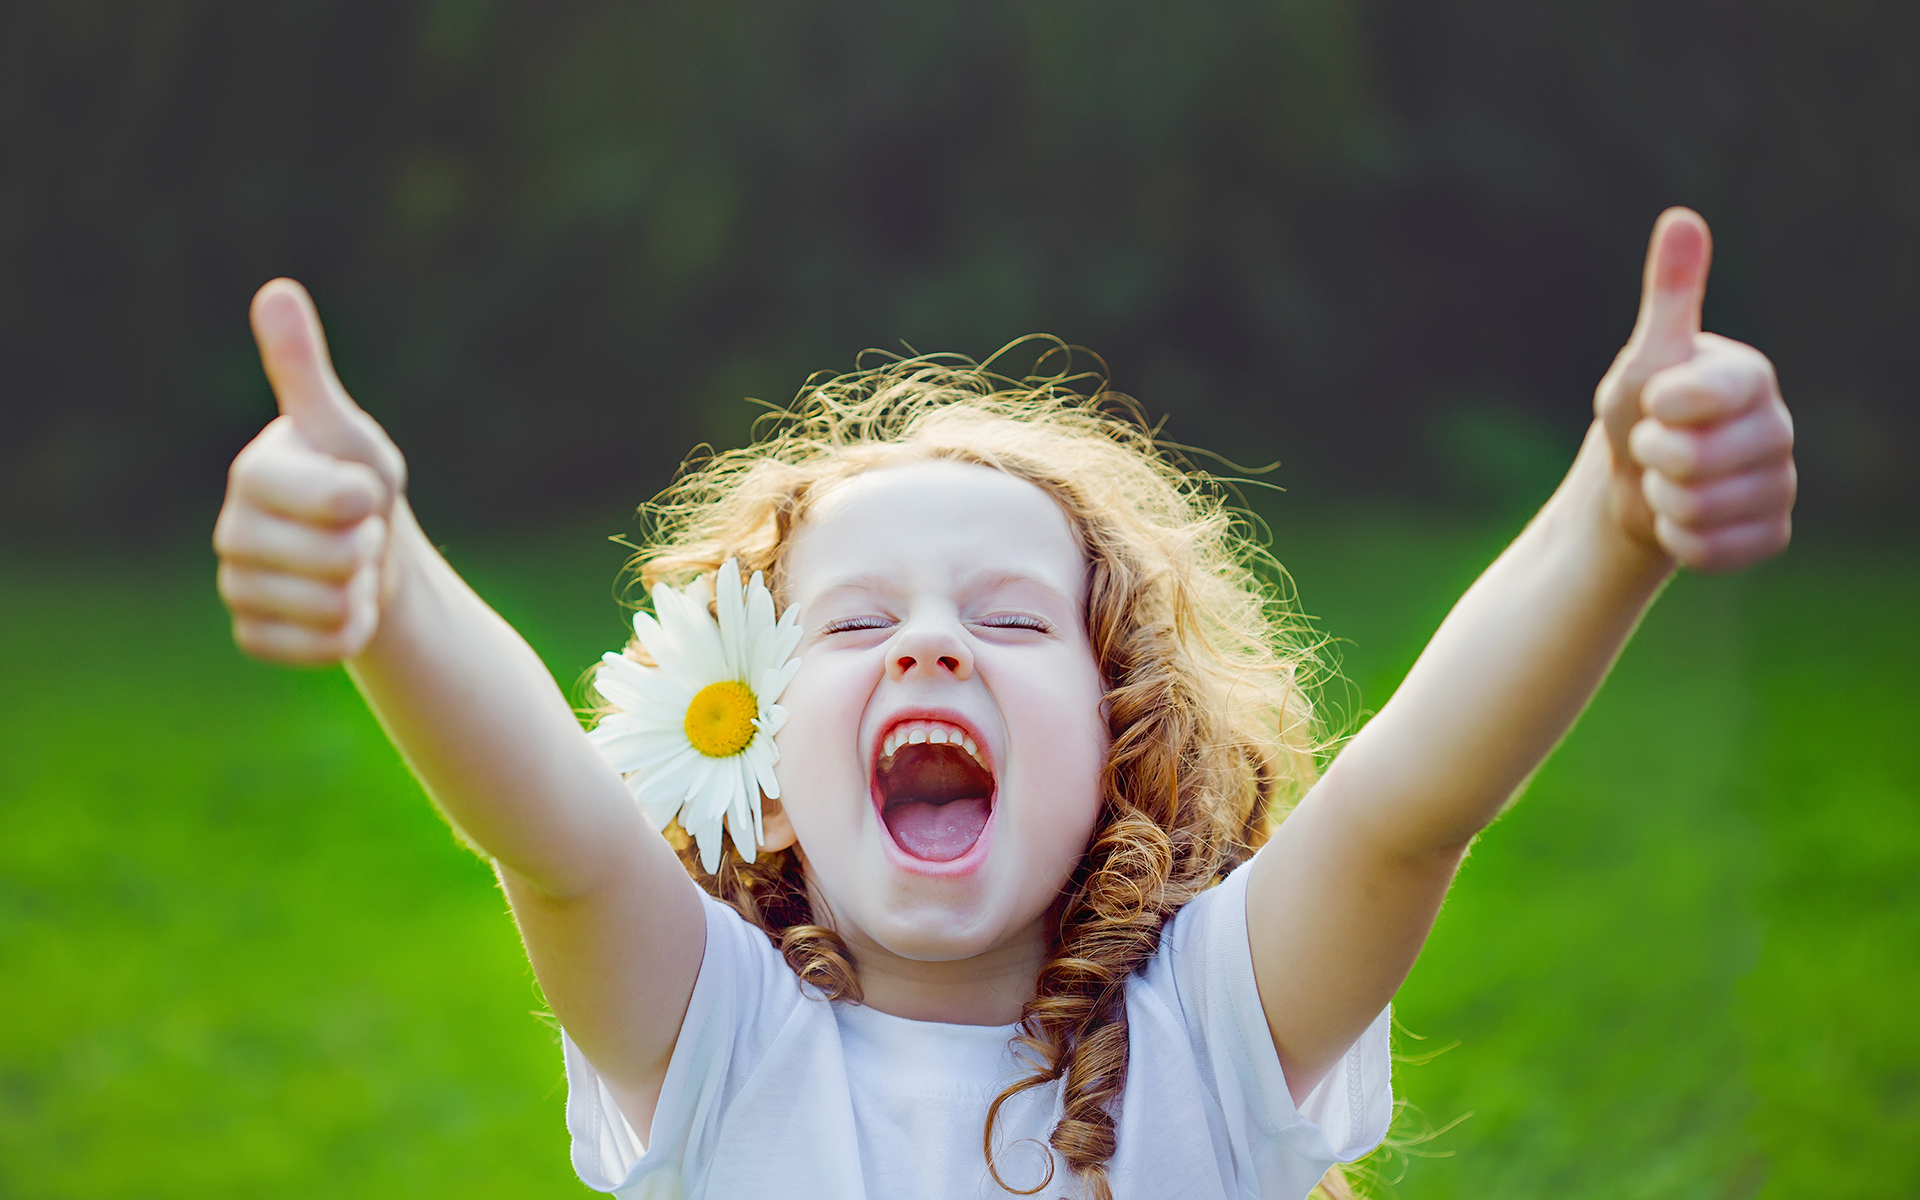 Photo of a little girl with light skin and red curly hair standing outside with a daisy tucked behind her ear with a big smile and giving two thumbs up to the camera.